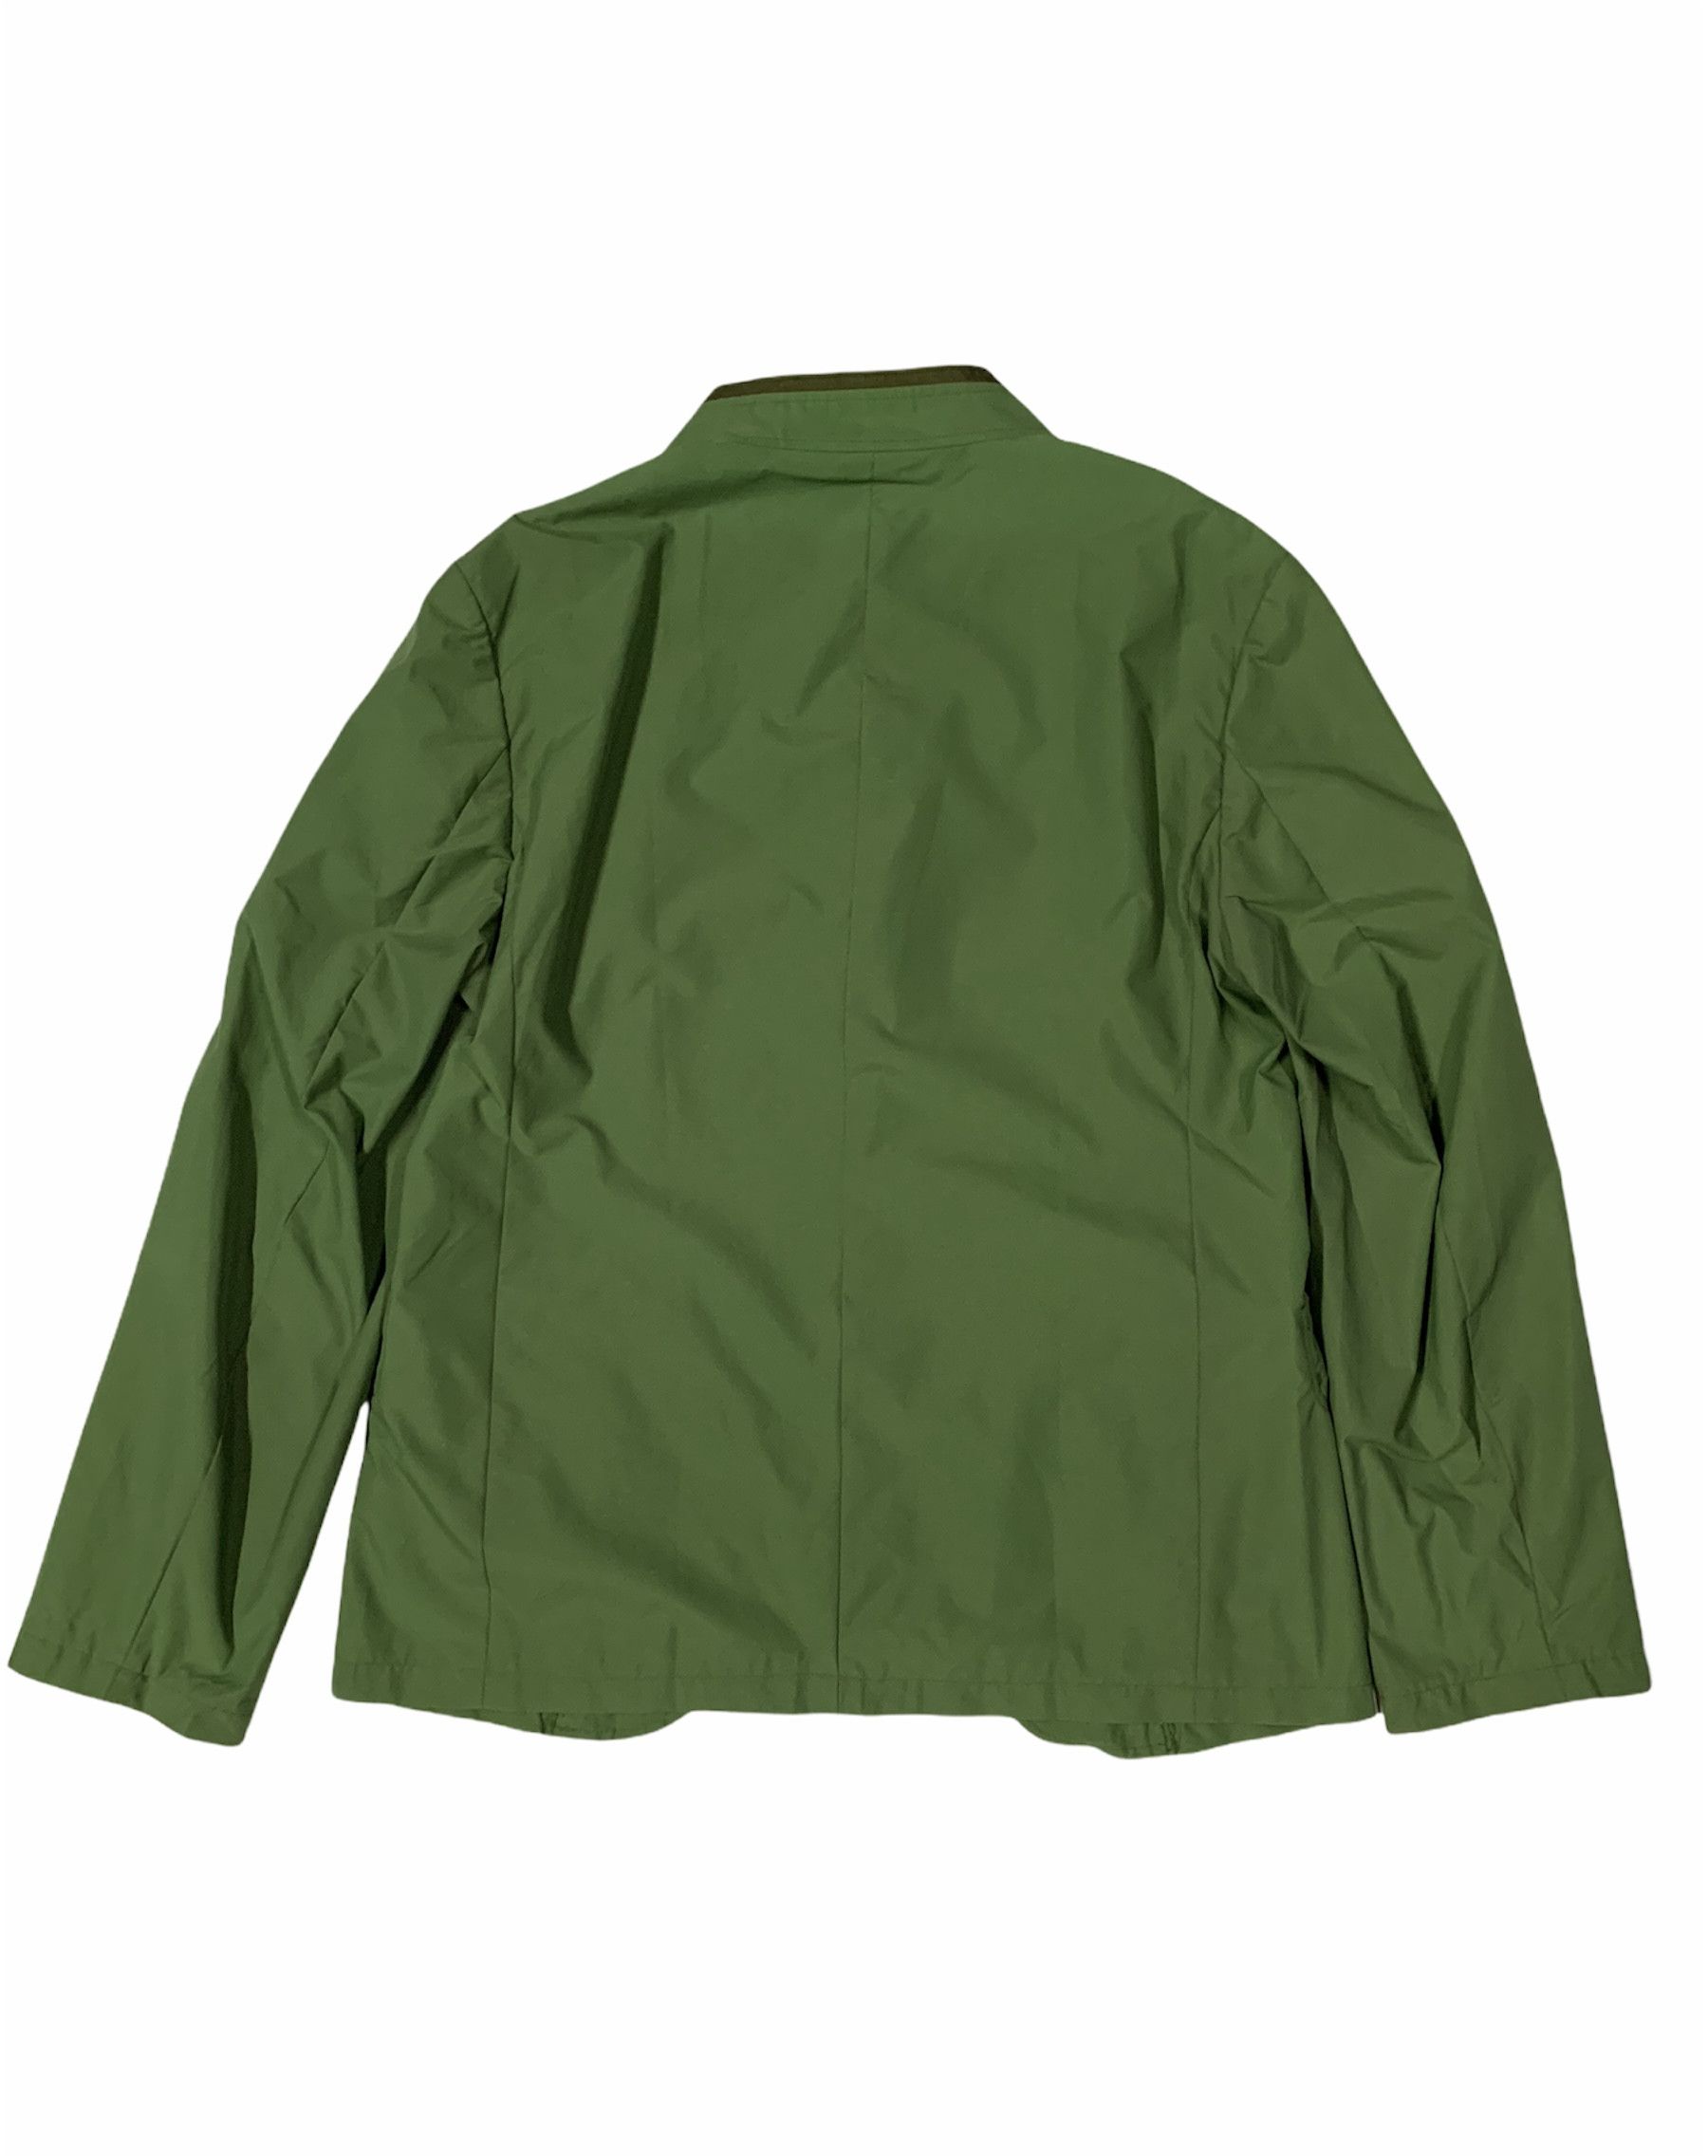 🔥UNDERCOVER CHOATIC DISCHORD JACKETS OLIVE GREEN - 4